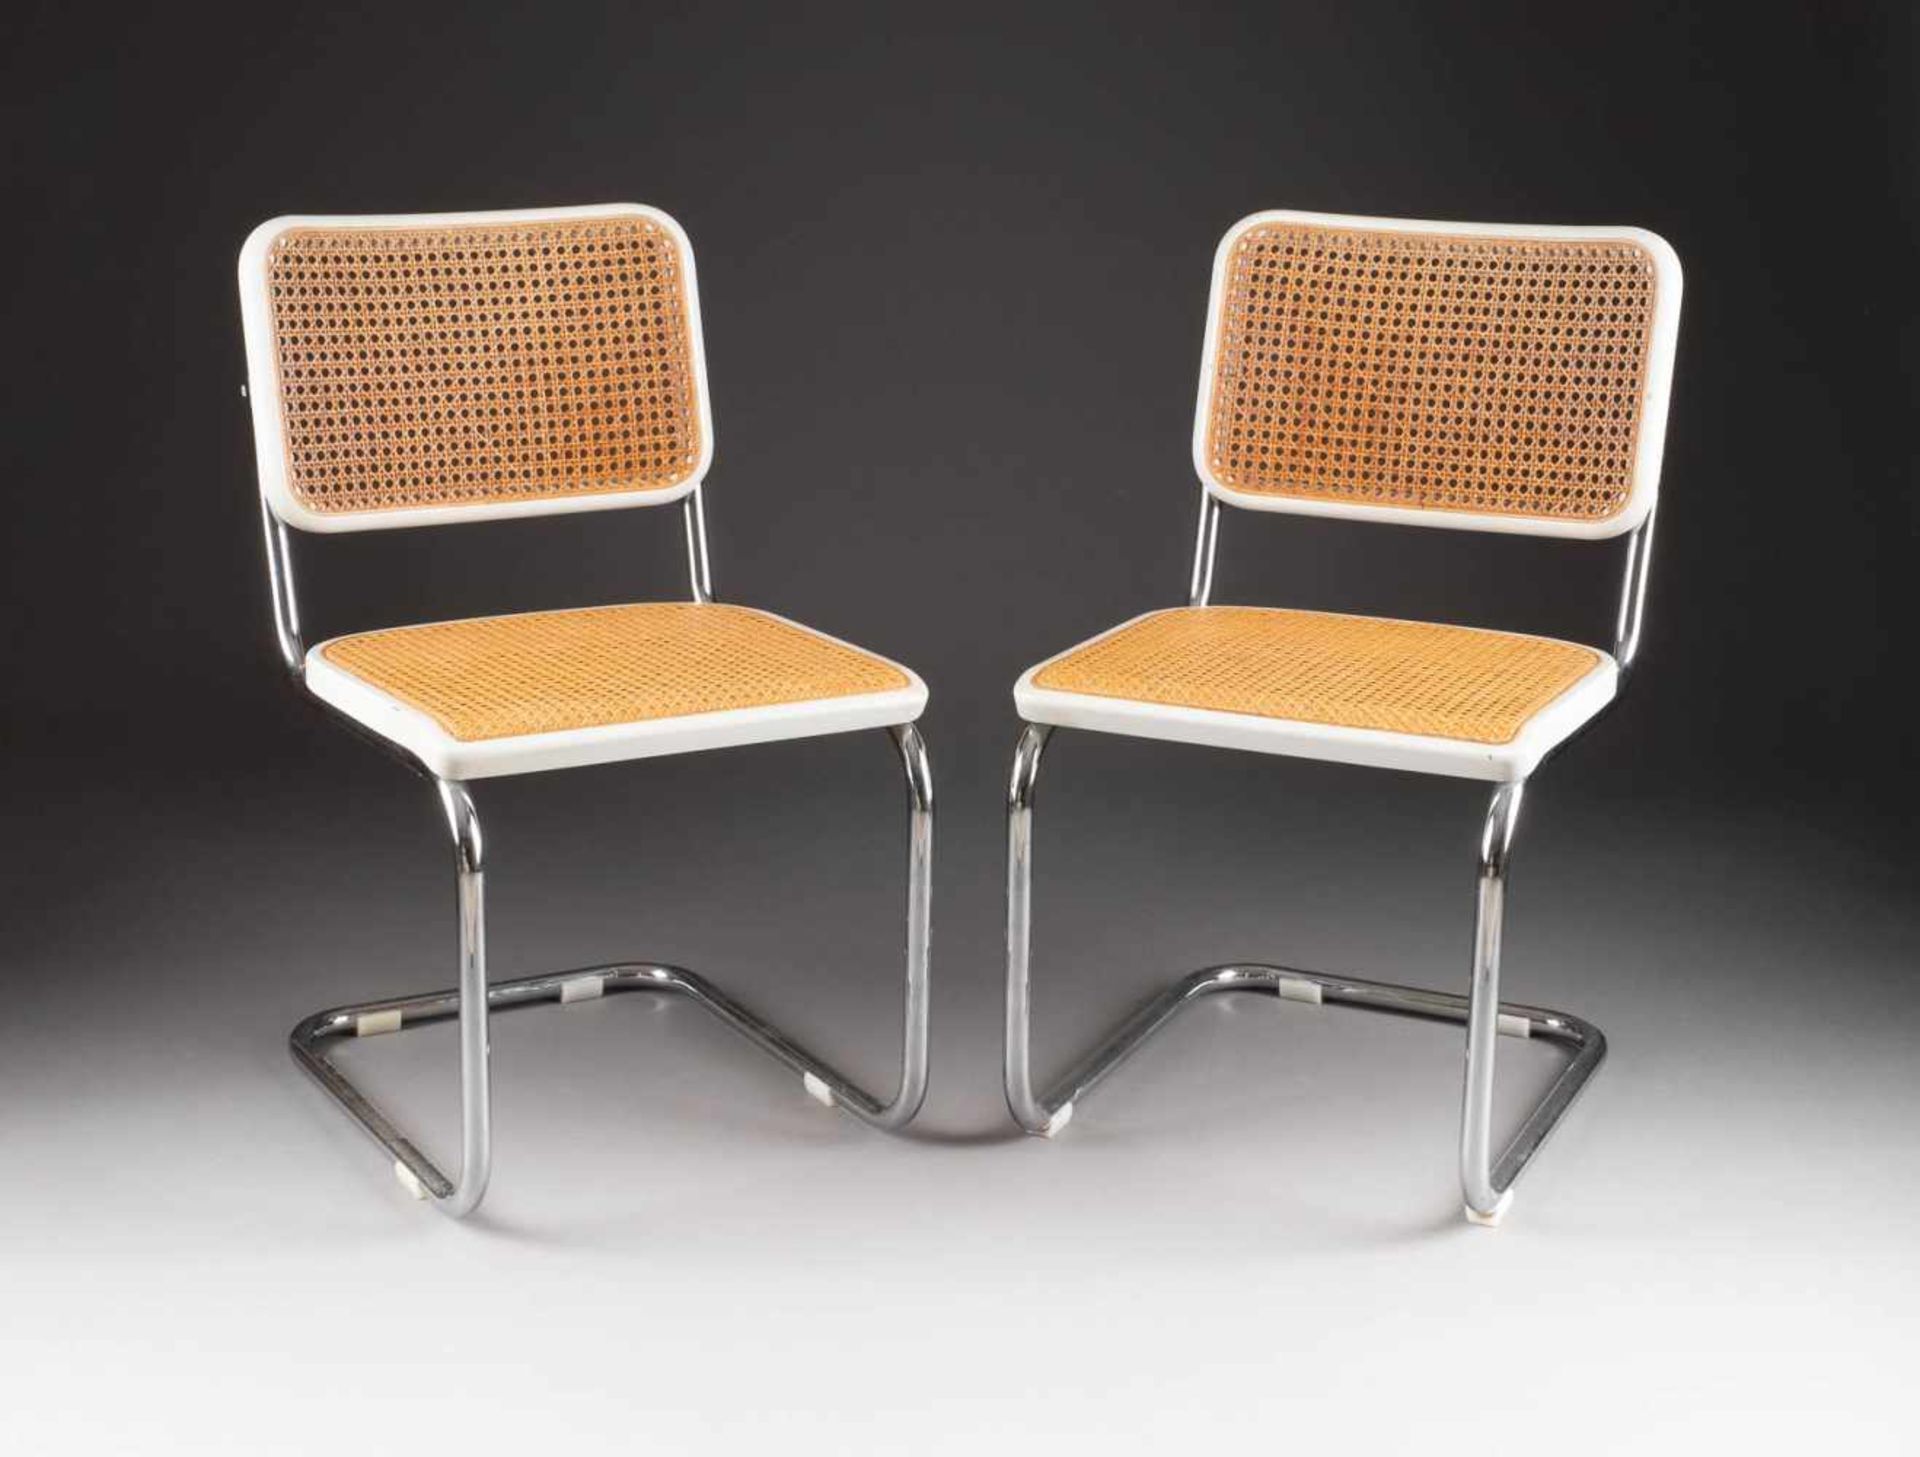 MARCEL BREUER (DESIGN)1902 Pécs (Hungary) - 1981 New York City TWO THONET CANTILEVER CHAIRS S32